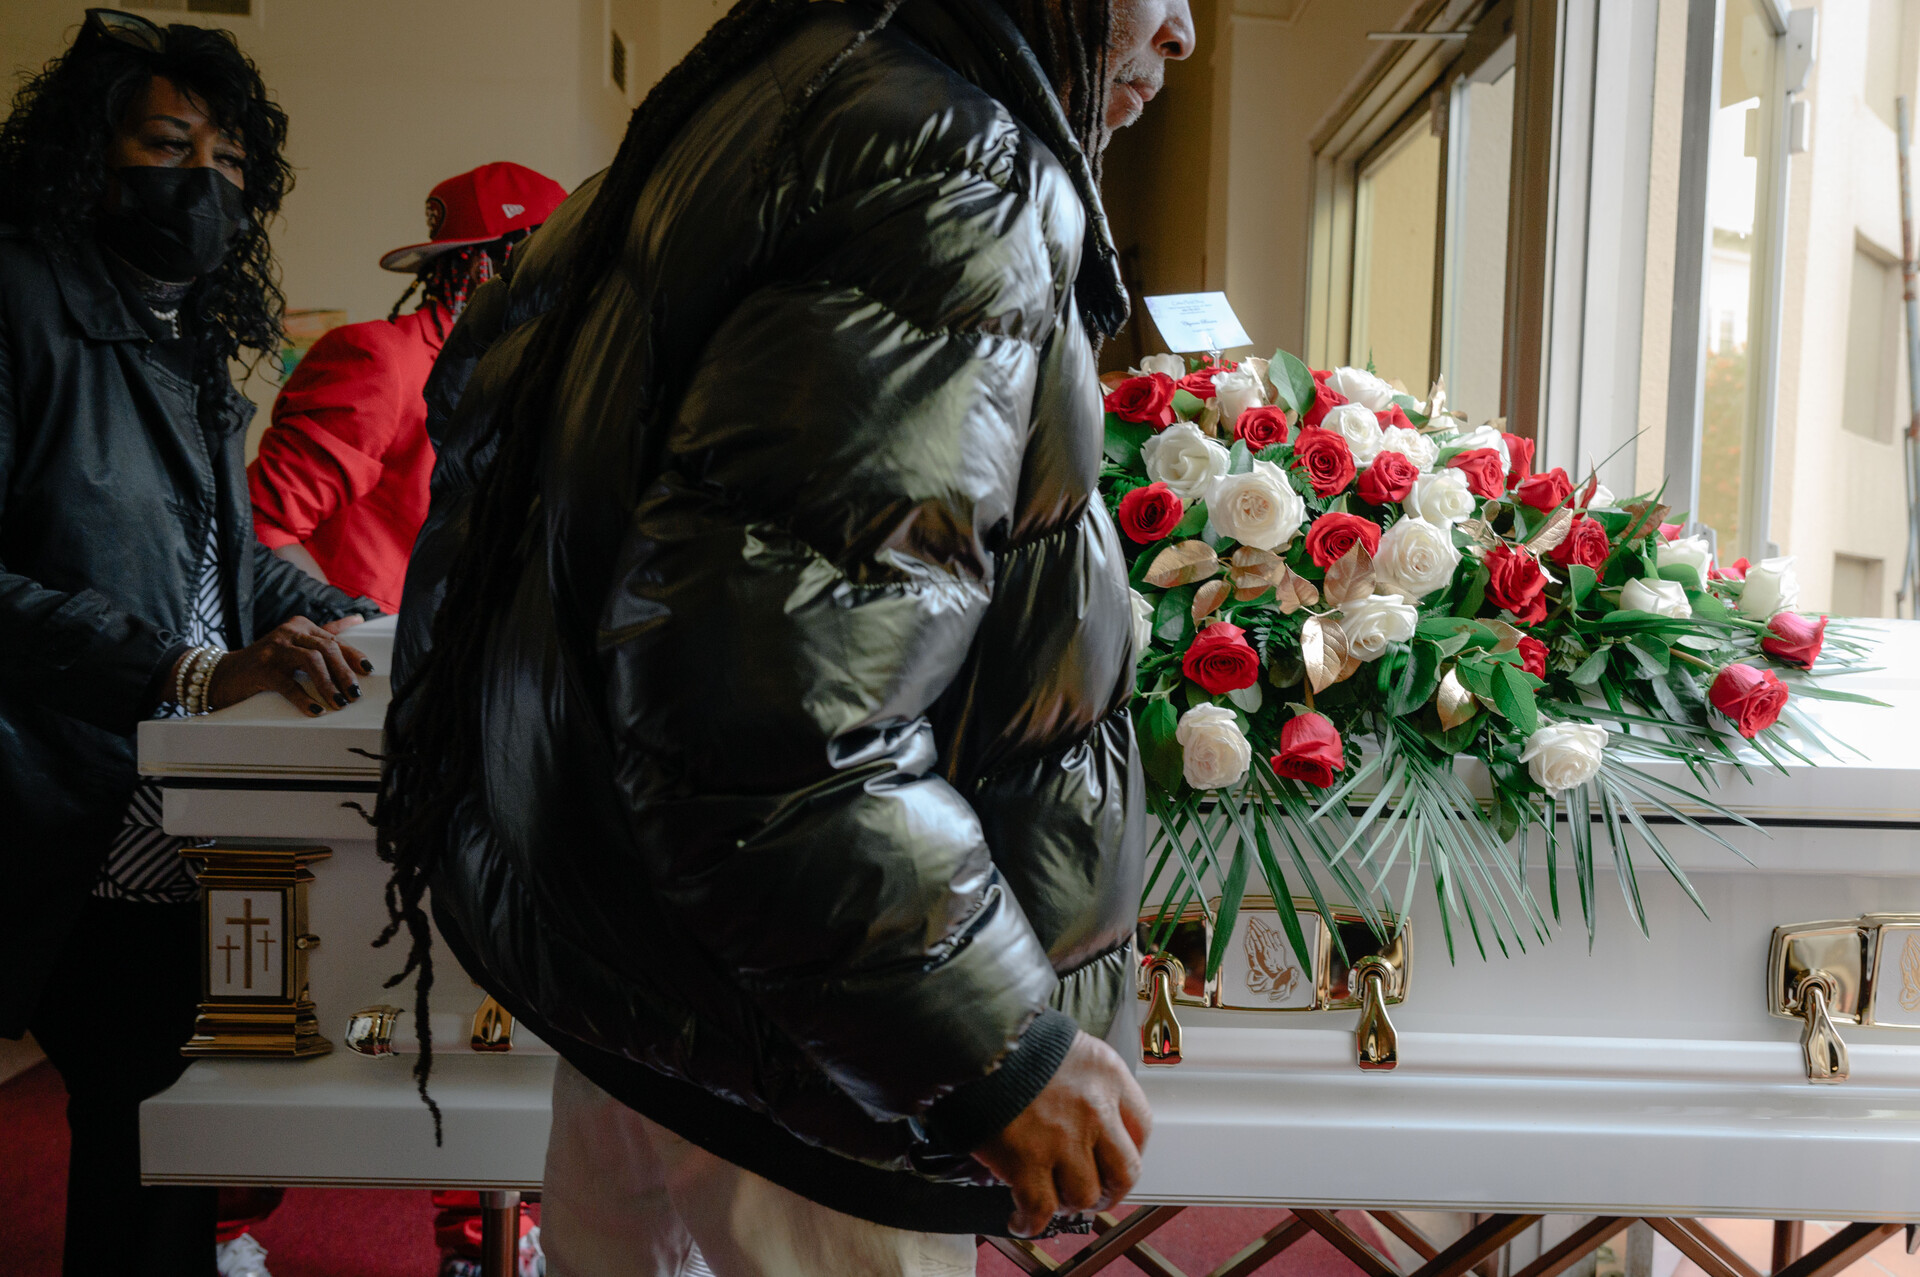 a man with dreadlocks, in a black coat, carries a white coffin covered in flowers, with two other men in the background also holding the coffin 